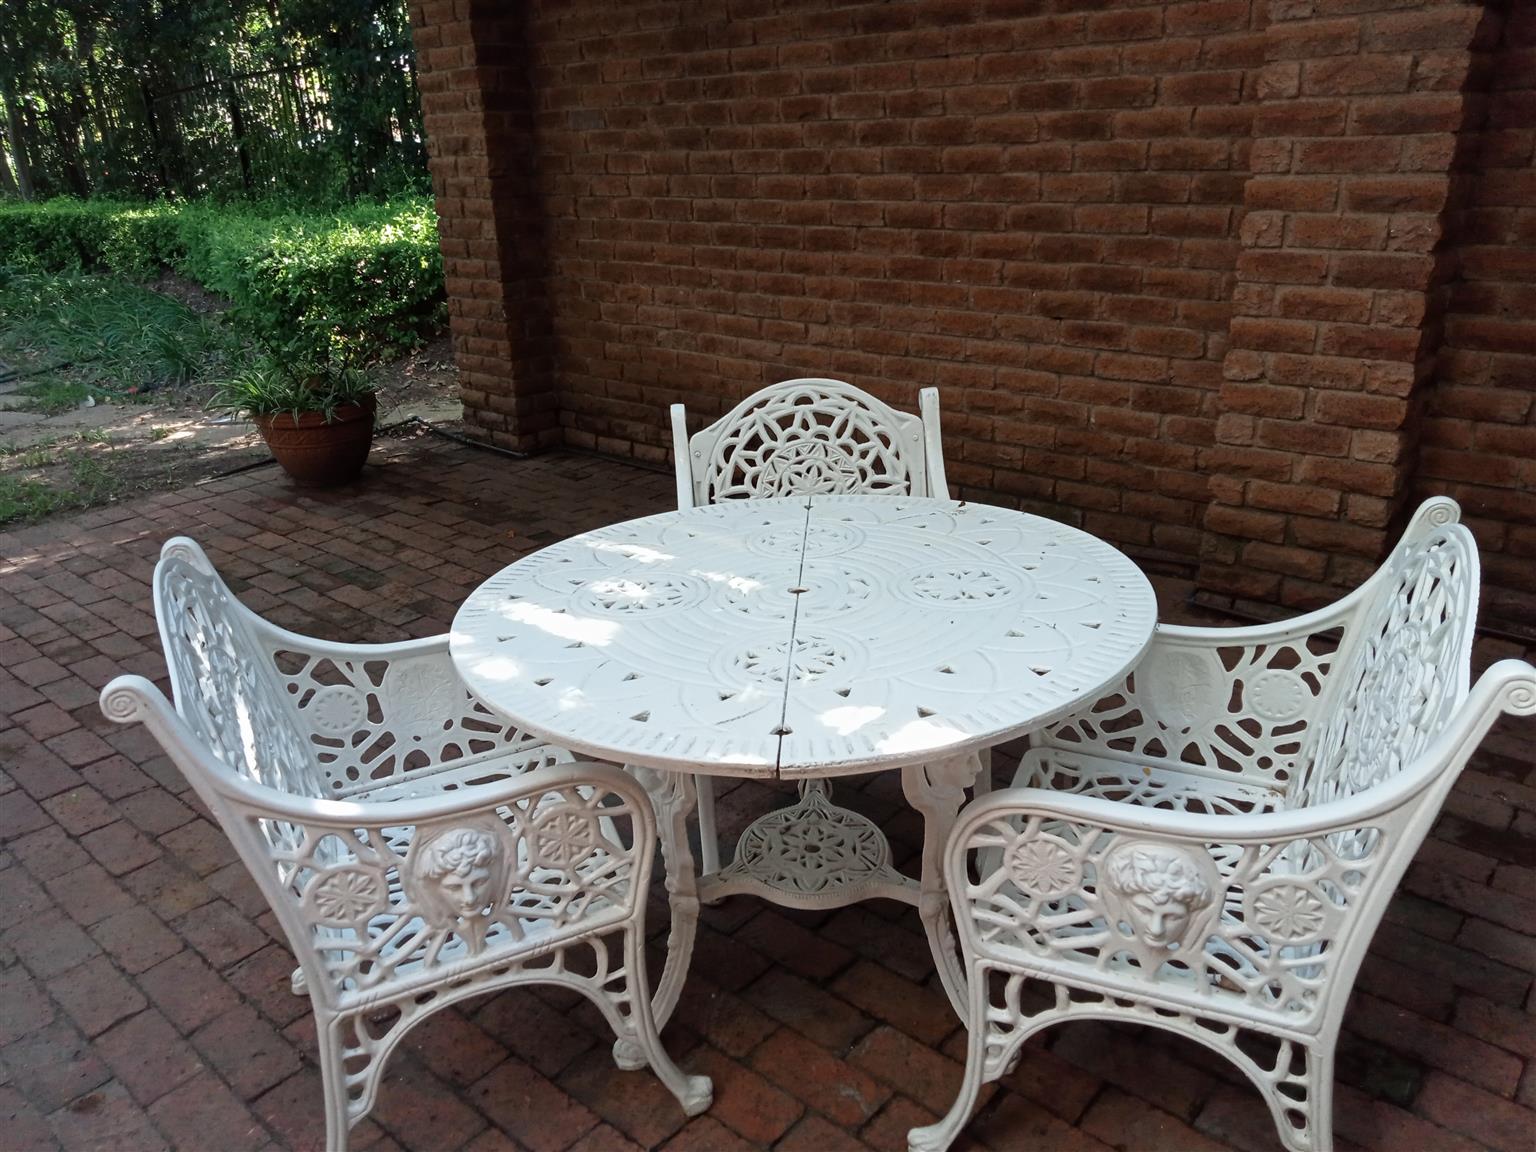 X 2 Cast Iron Tables , X 7 Cast Iron Chairs